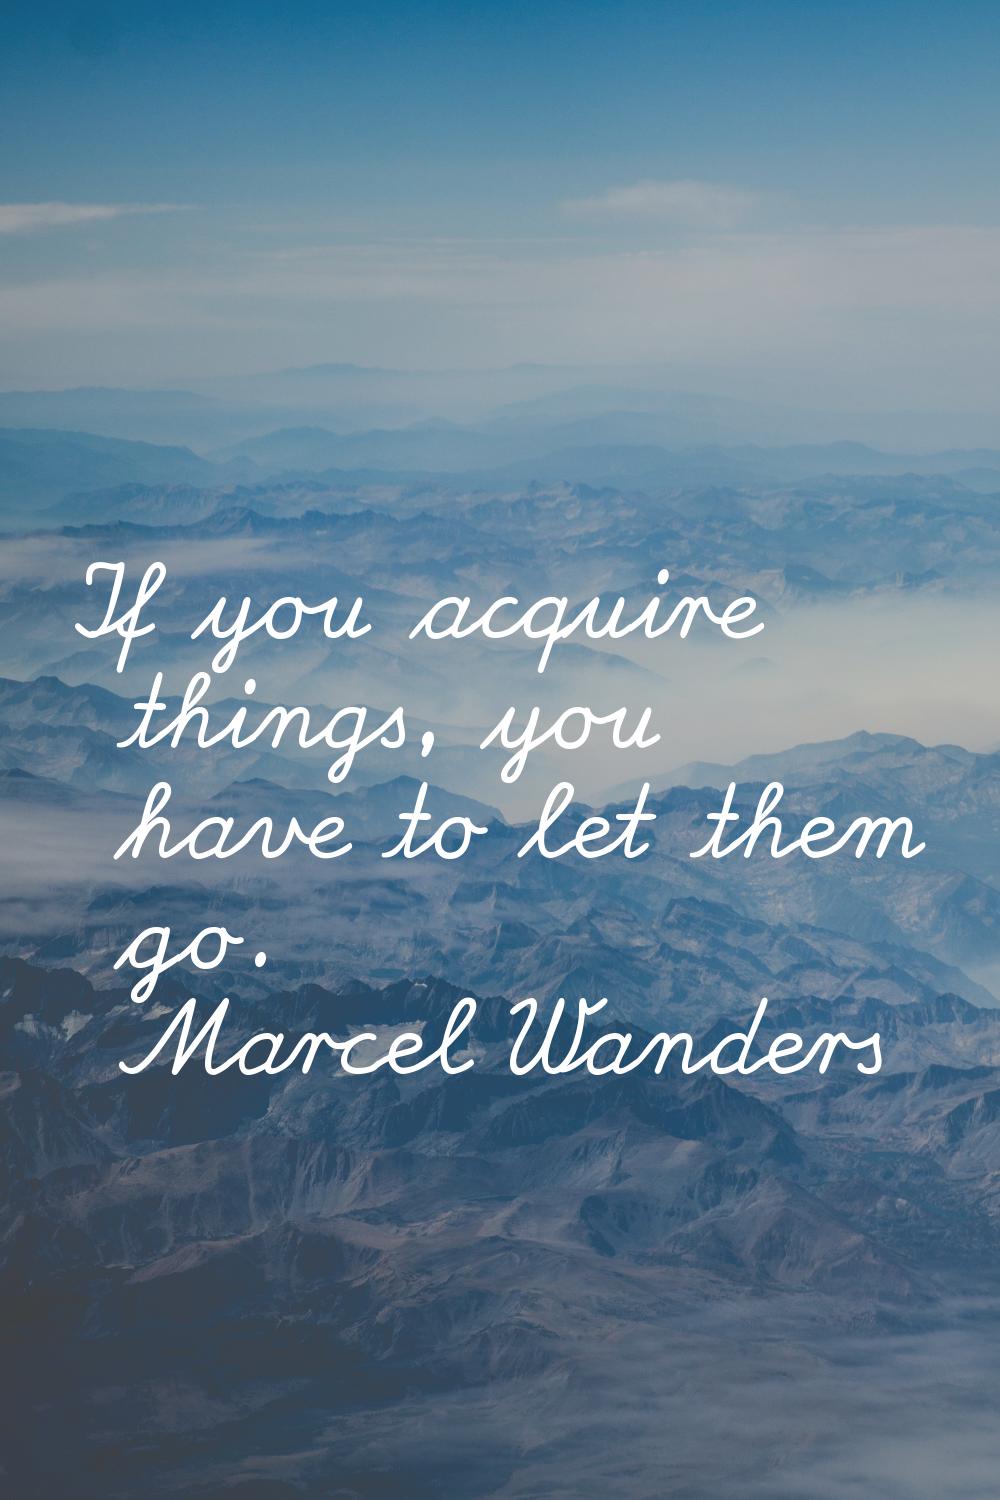 If you acquire things, you have to let them go.